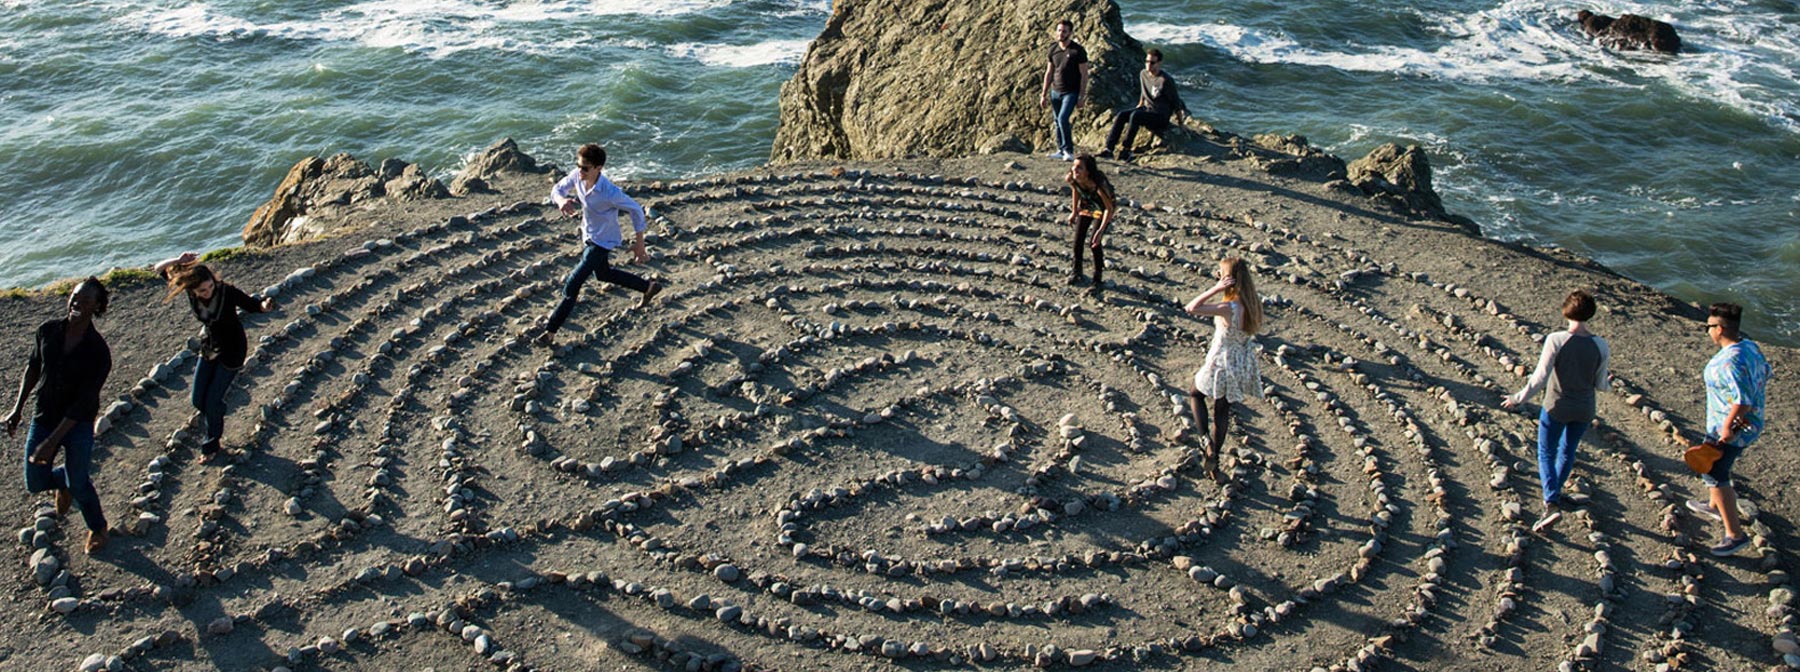 Students running through the stone maze at SF's Land's End park